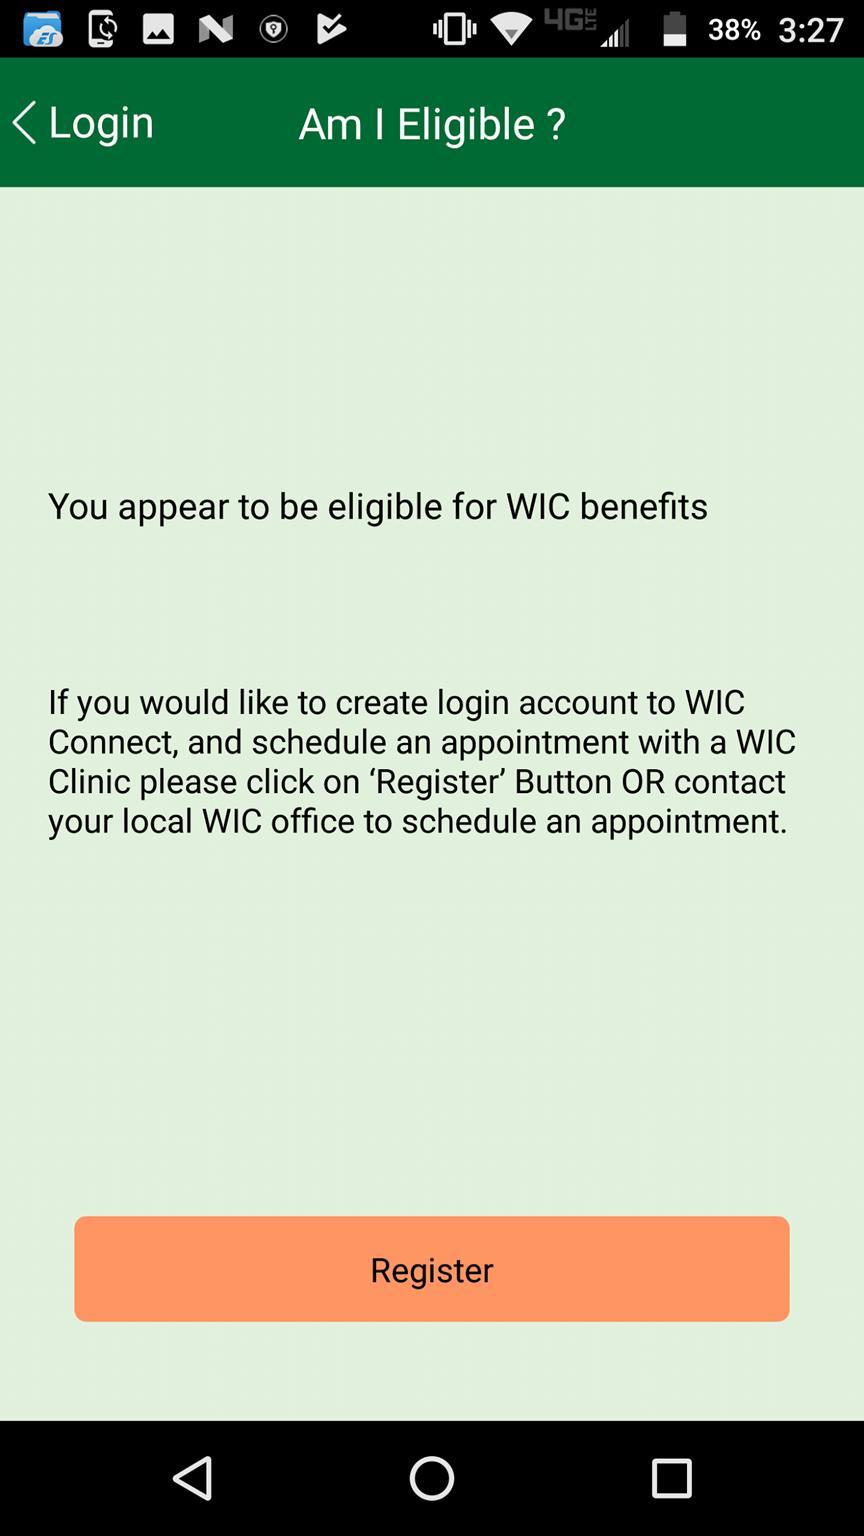 Clients are eligible for WIC program with no